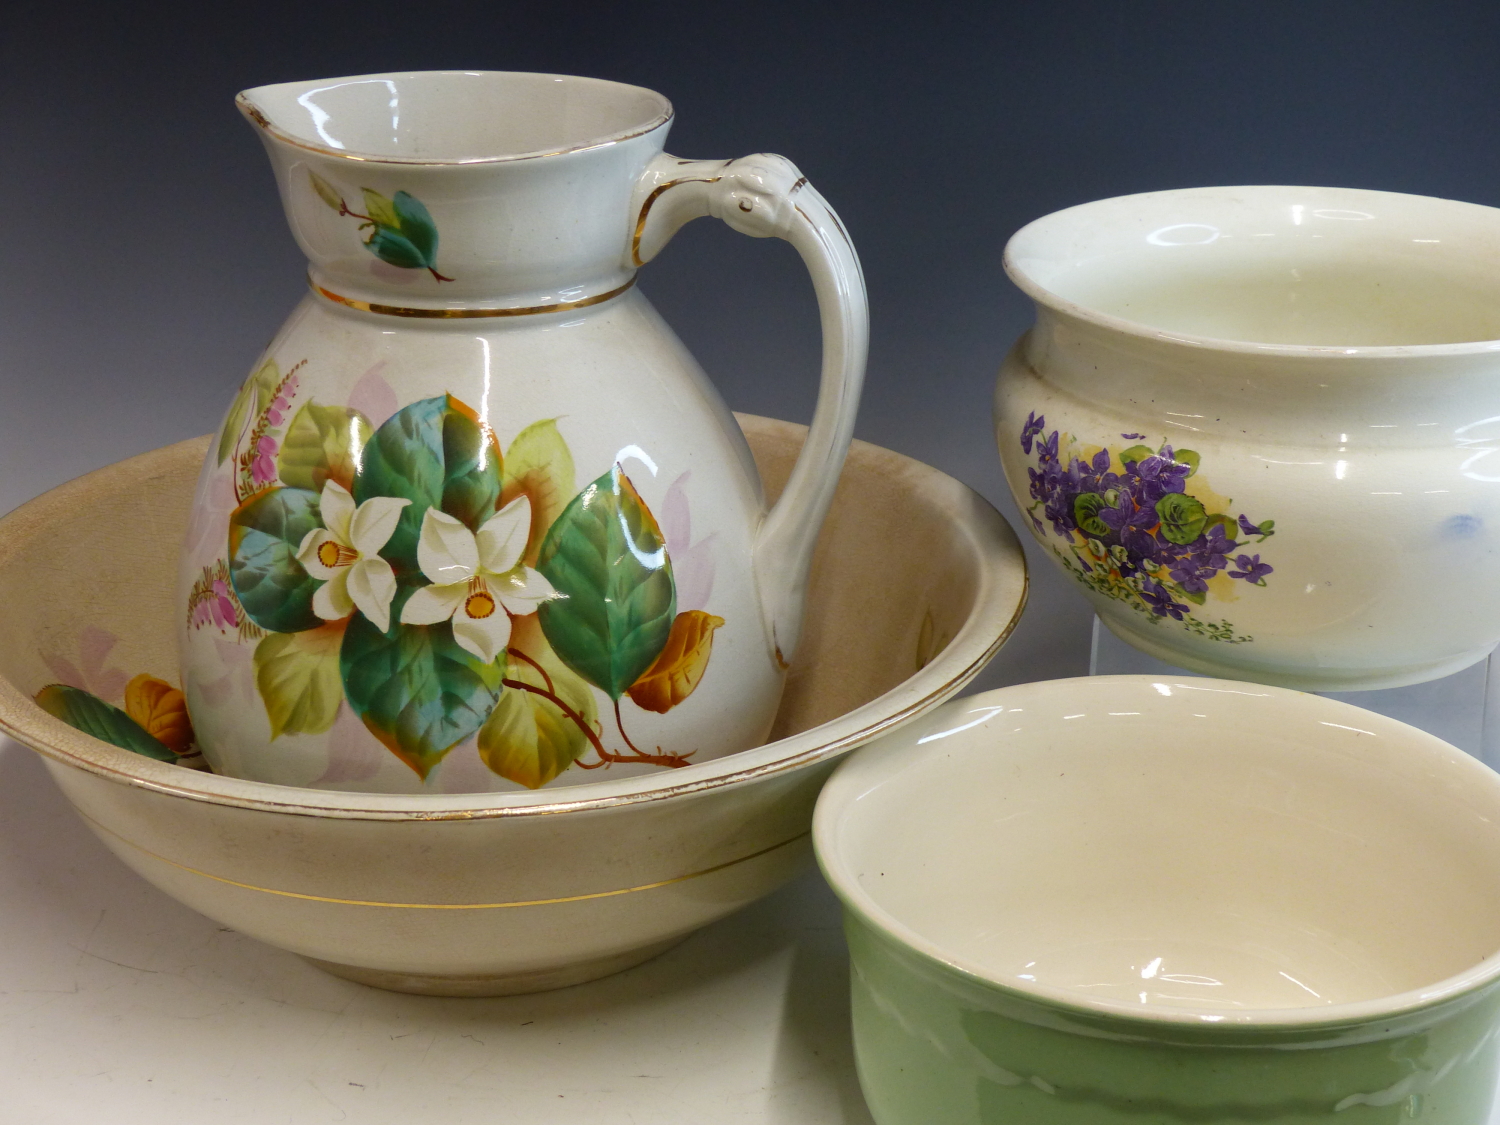 AN EARLY 20th CENTURY POTTERY WASH JUG AND BOWL SET WITH COTTAGE AND FLORAL DECORATION, AND TWO - Image 2 of 2